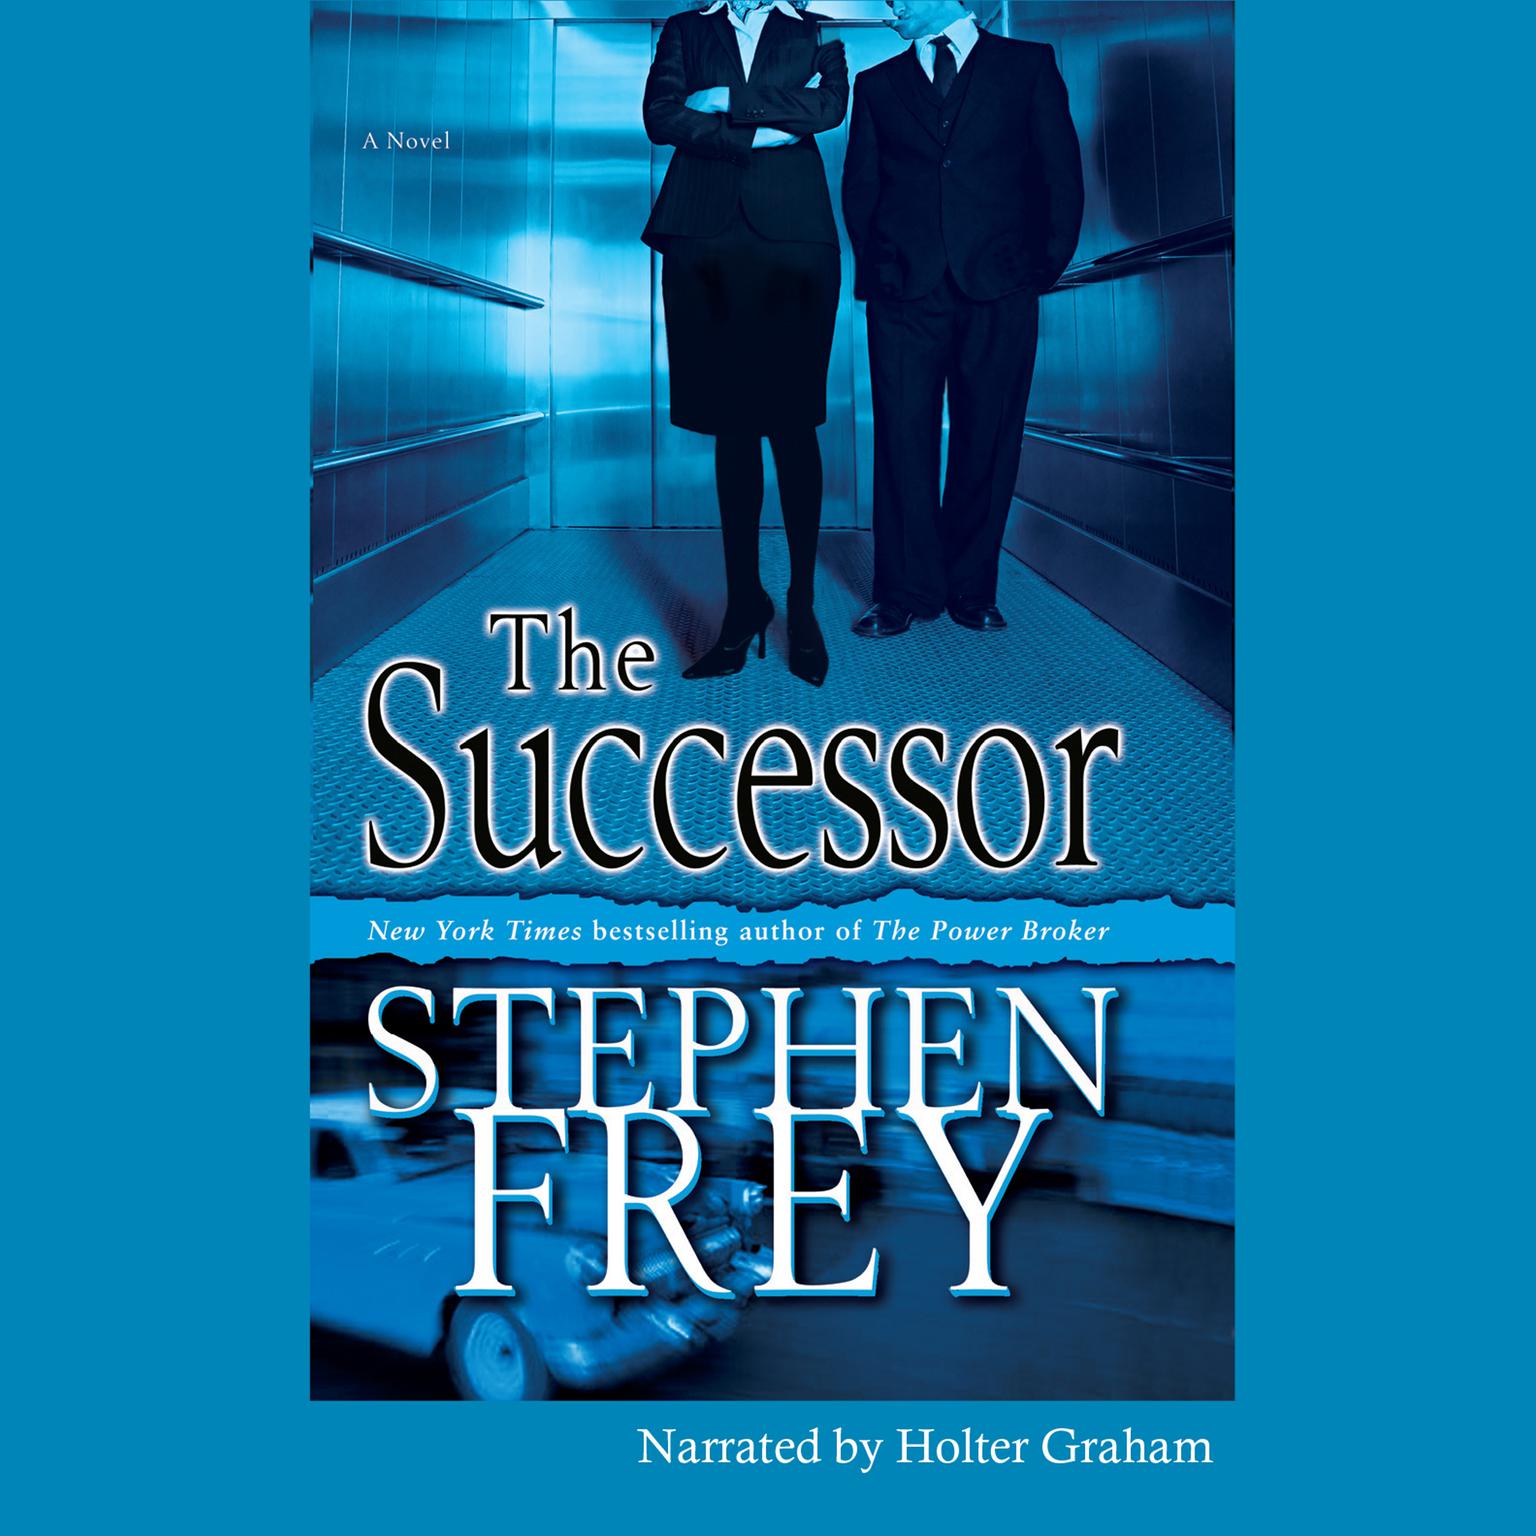 The Successor Audiobook, by Stephen Frey